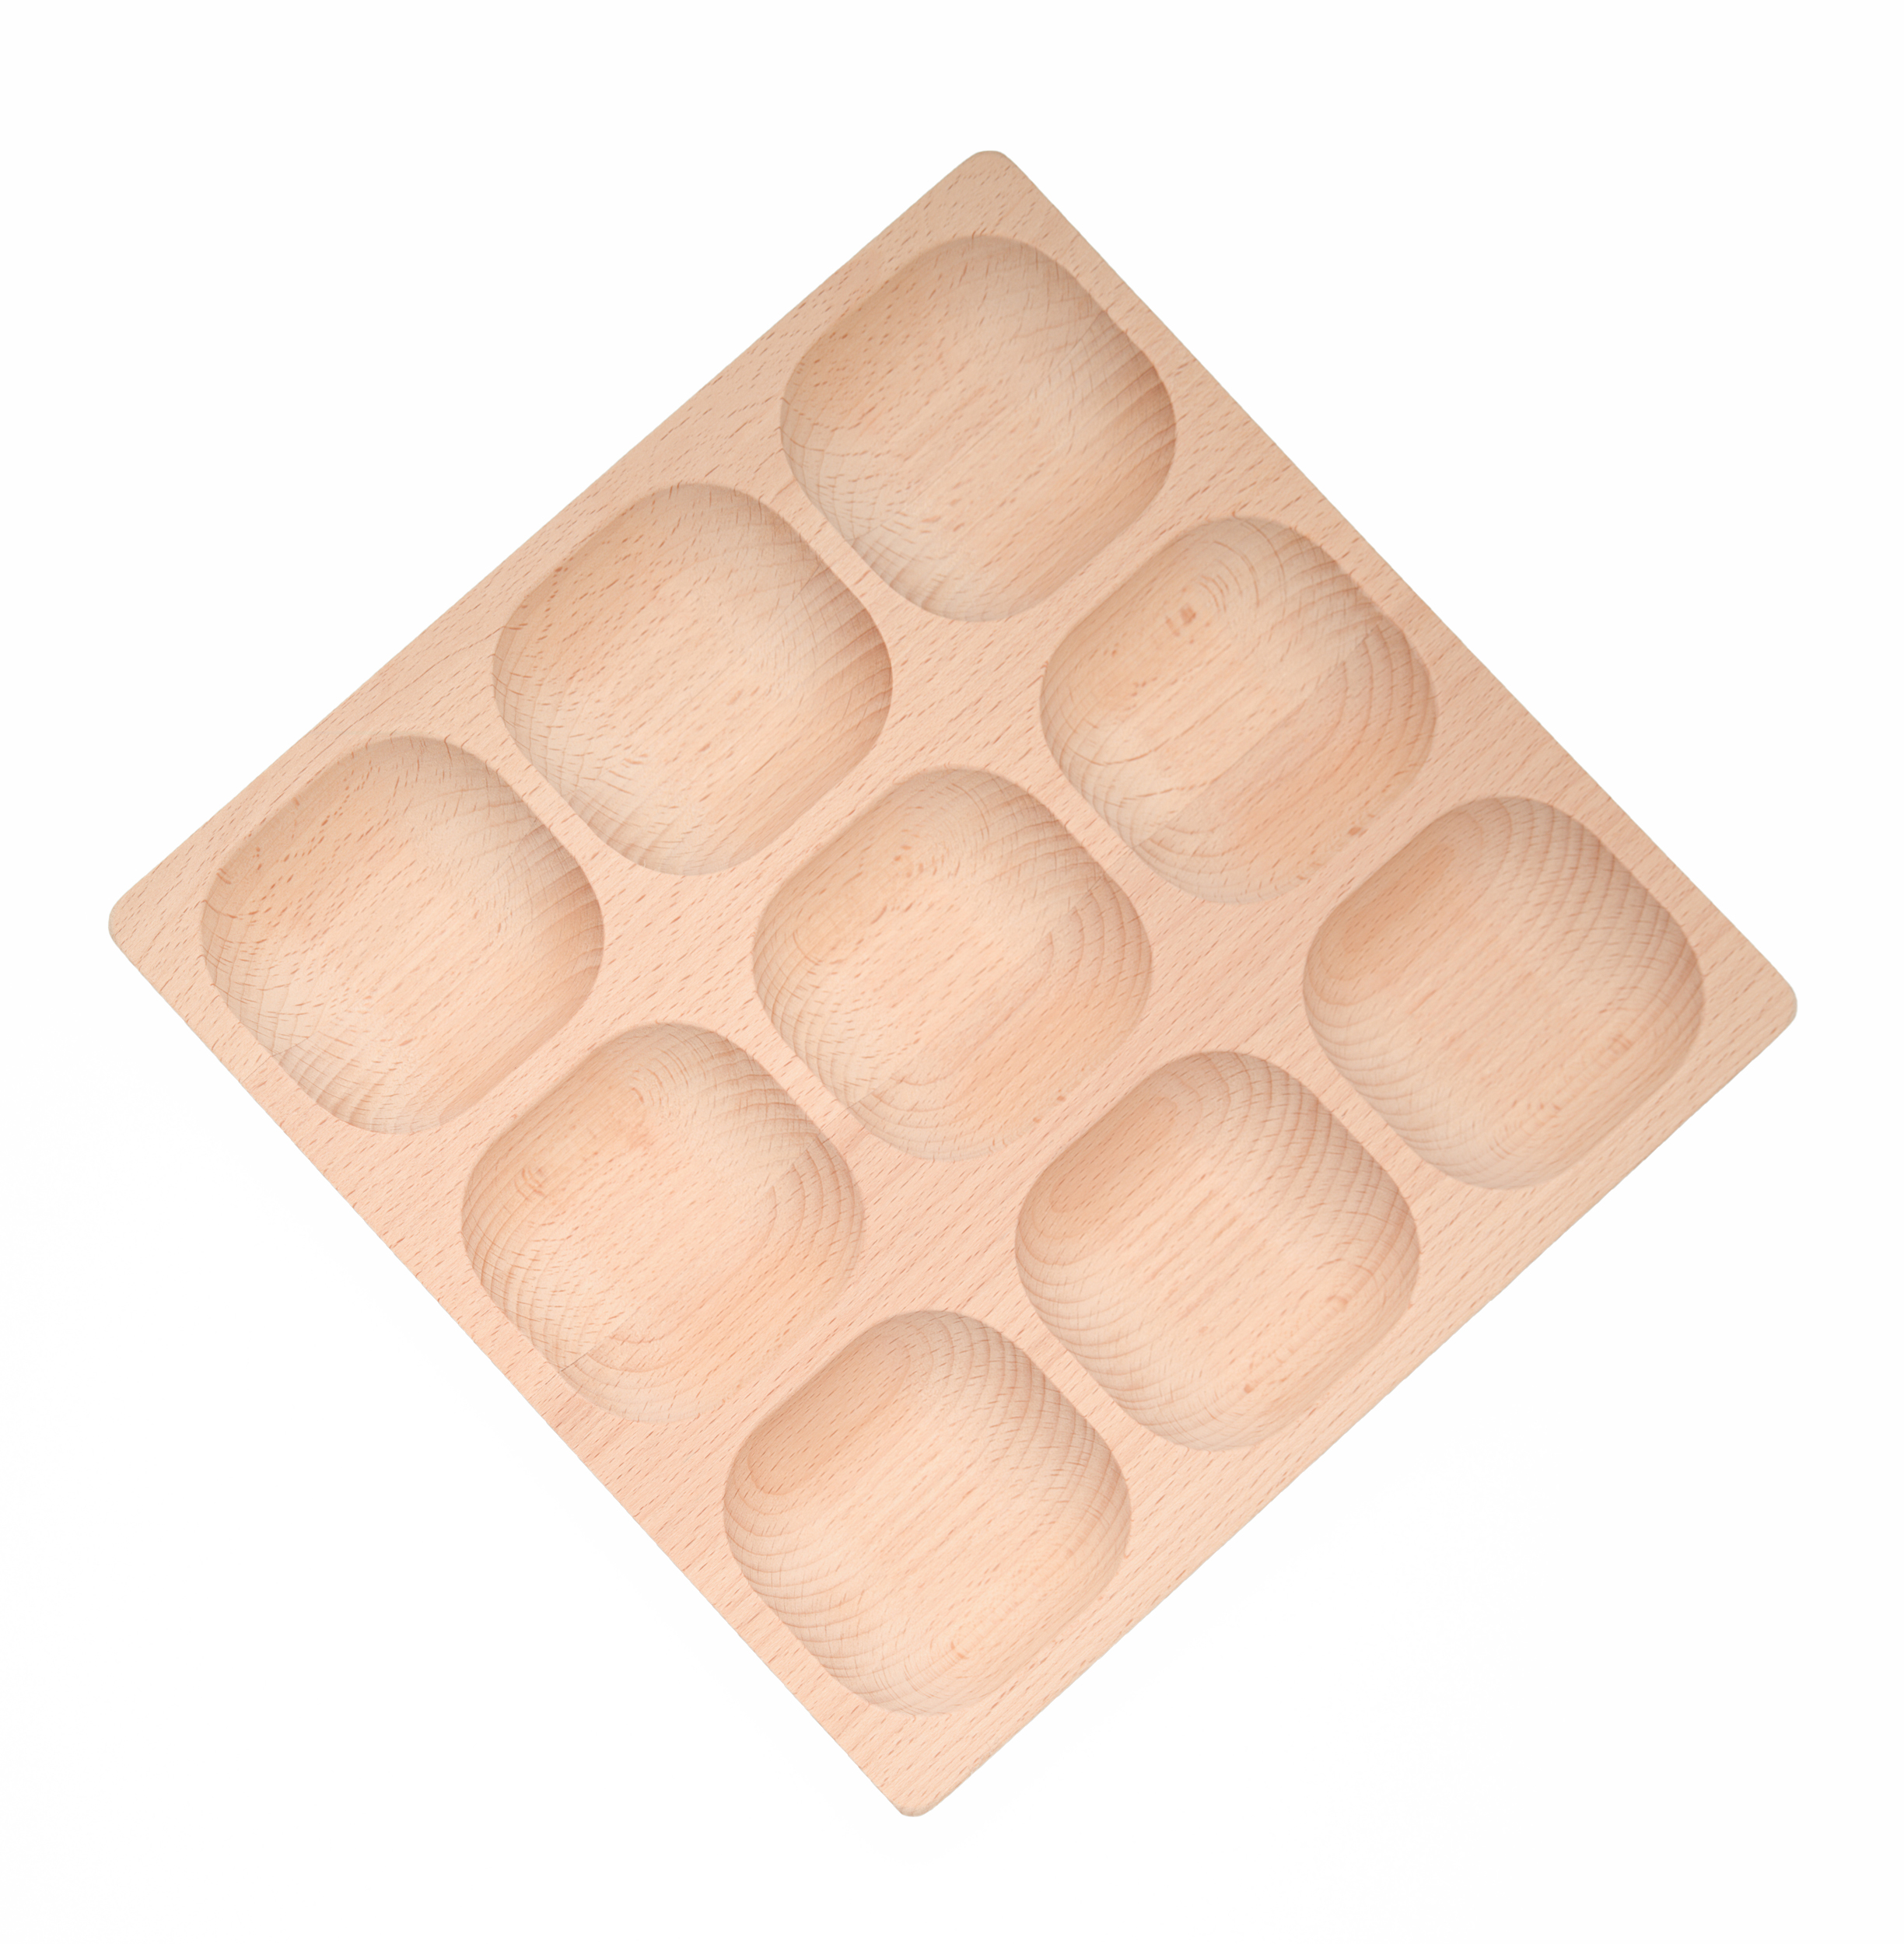 Natural Sorting Tray with 9 sections (3 x 3 array)